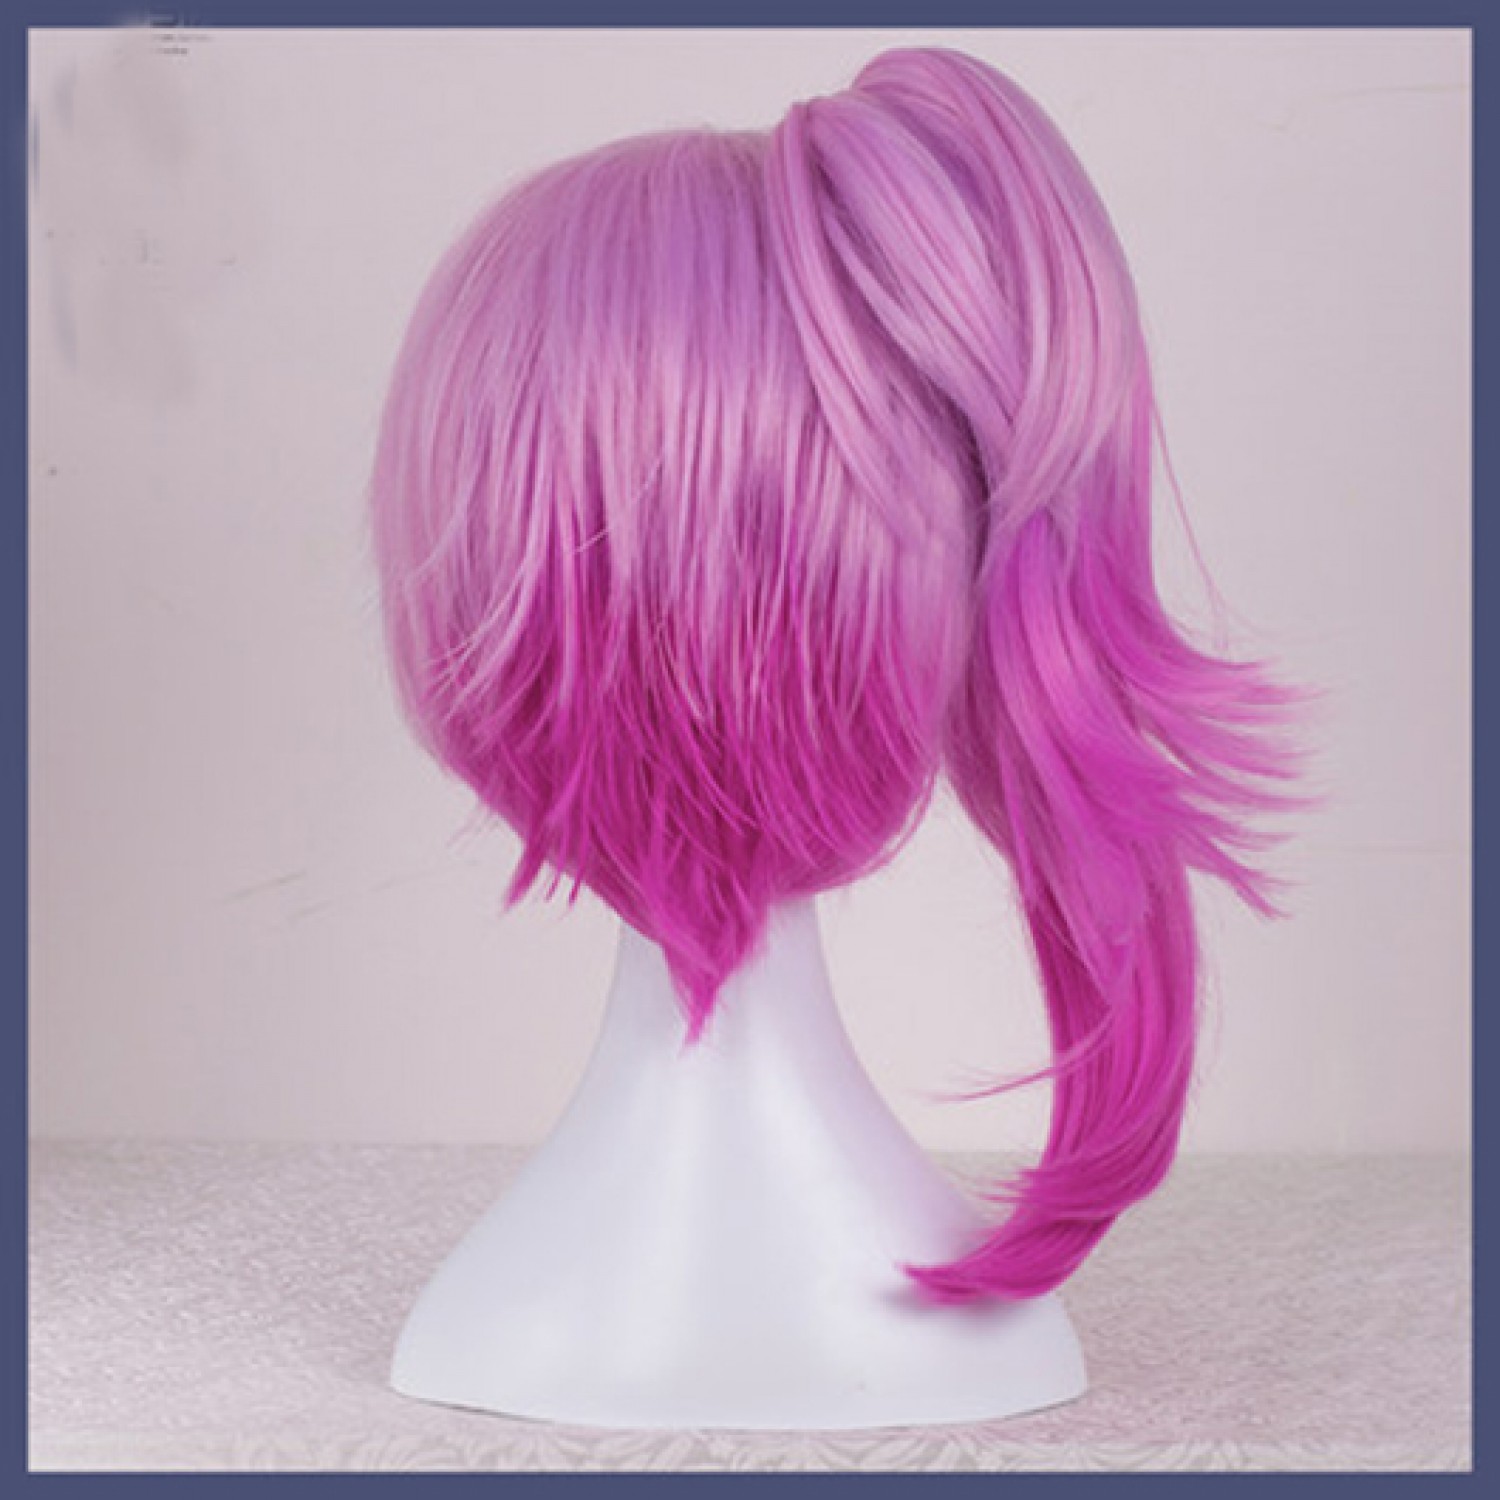 League of Legends C9 Sneaky Lux Cosplay Wig ( free shipping ) - $23.99